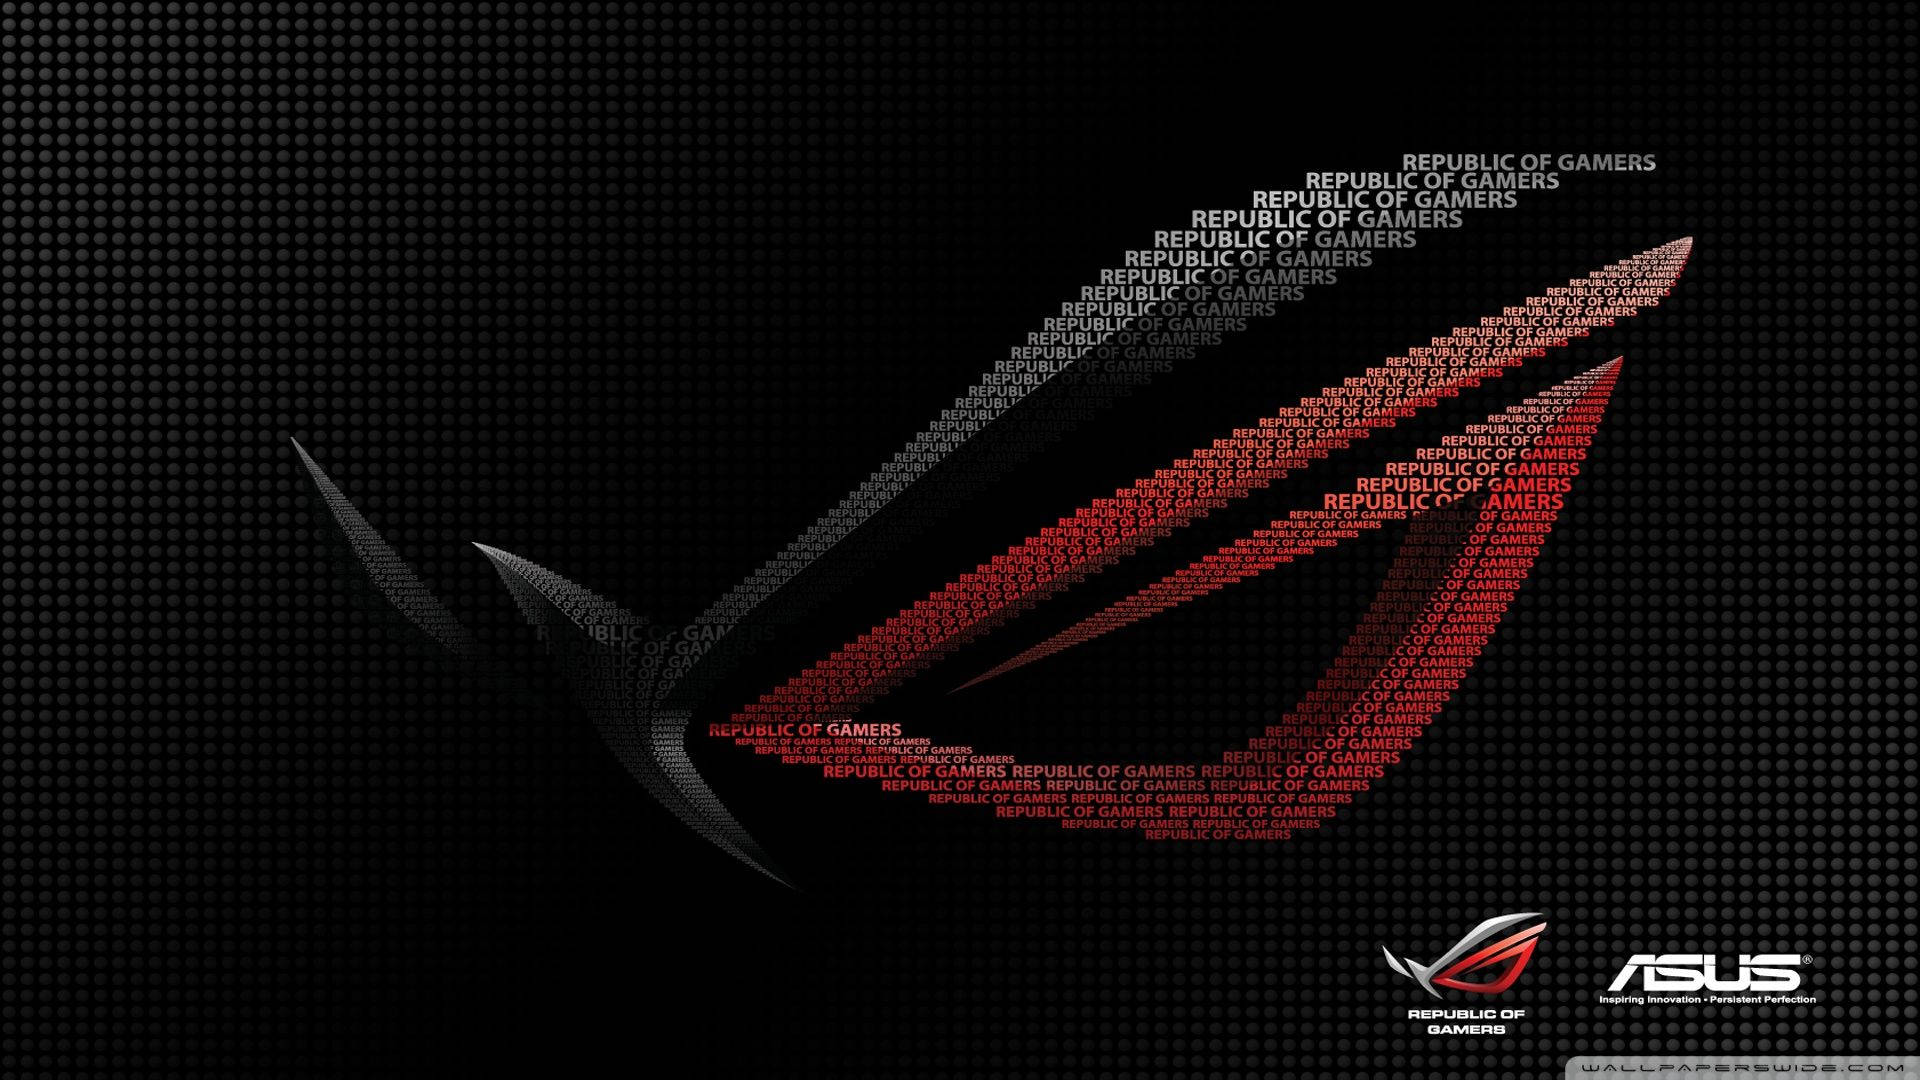 Experience gaming on a new level with the Asus ROG Wallpaper